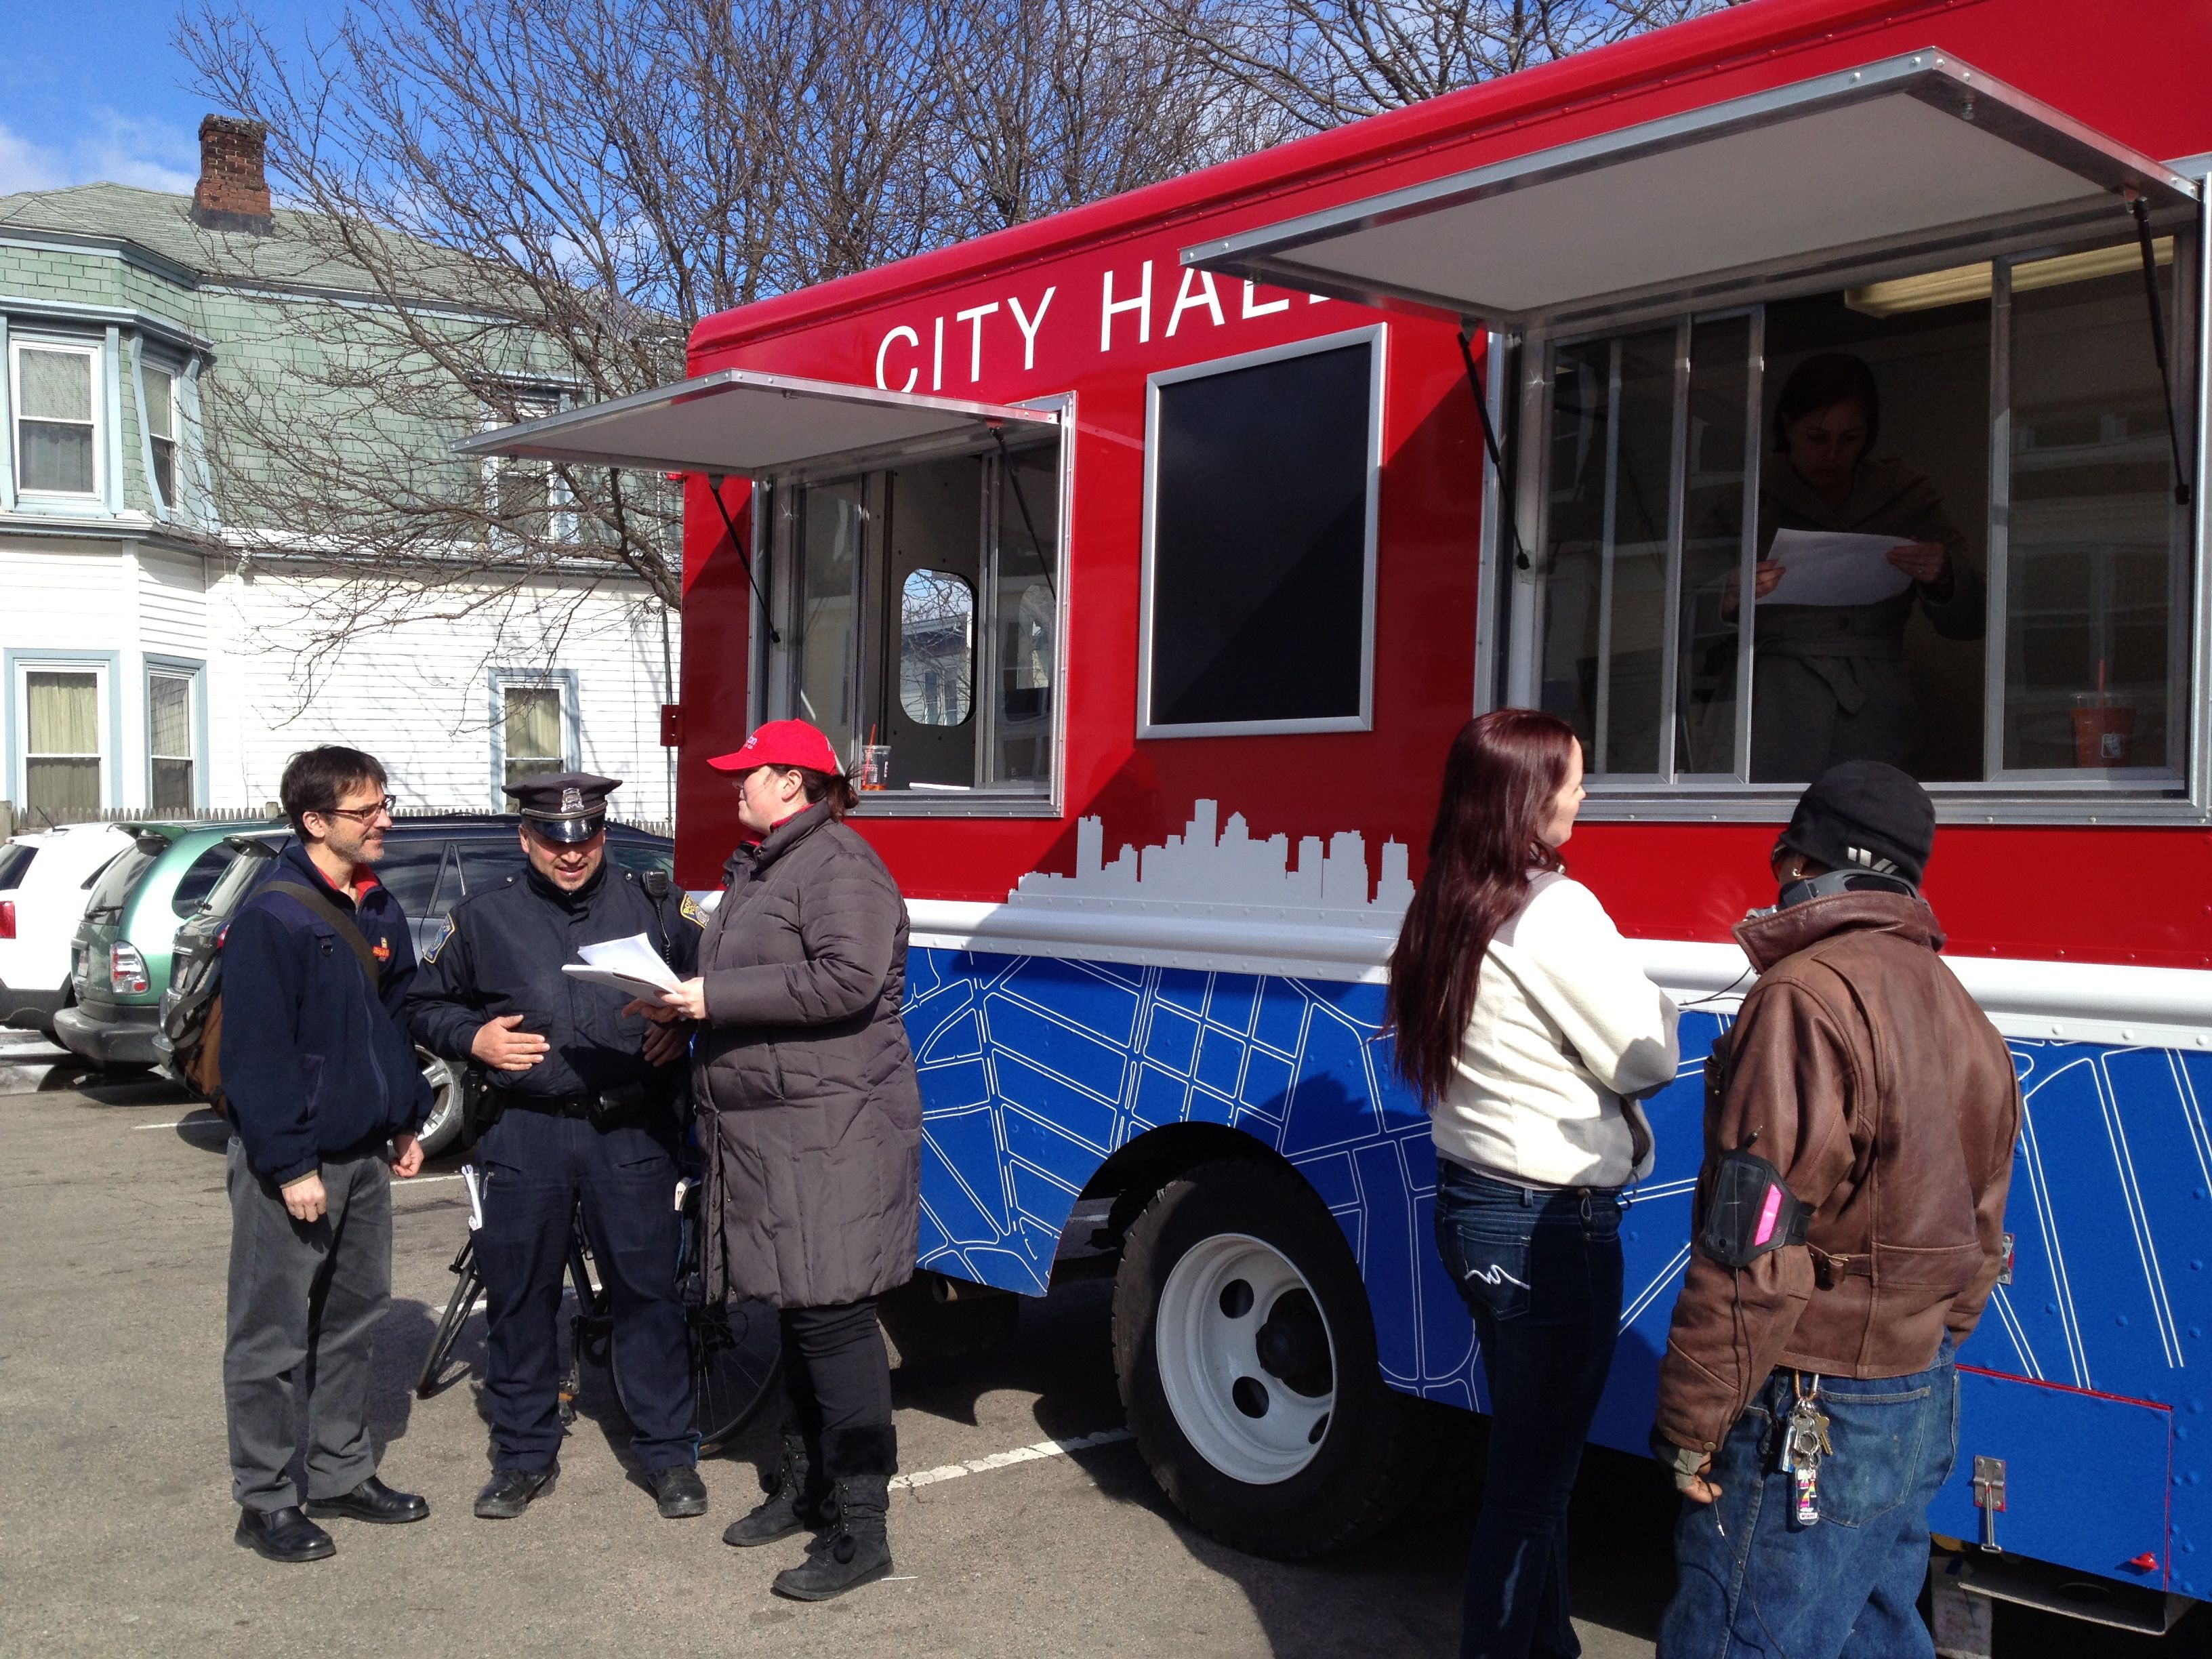 City Hall to Go in the Community